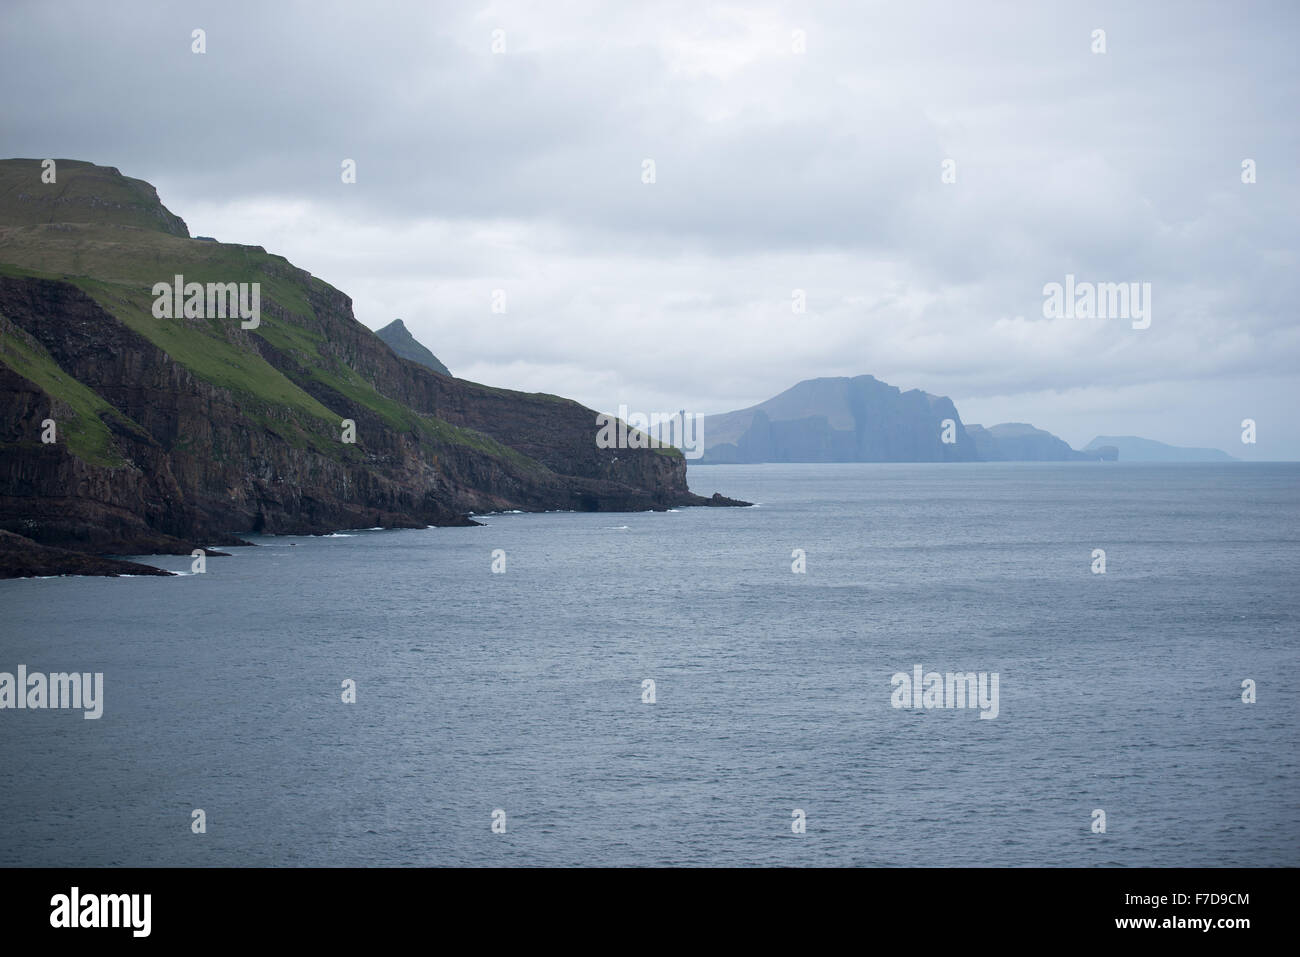 Typical landscape on the Faroe Islands, with green grass and rocks Stock Photo